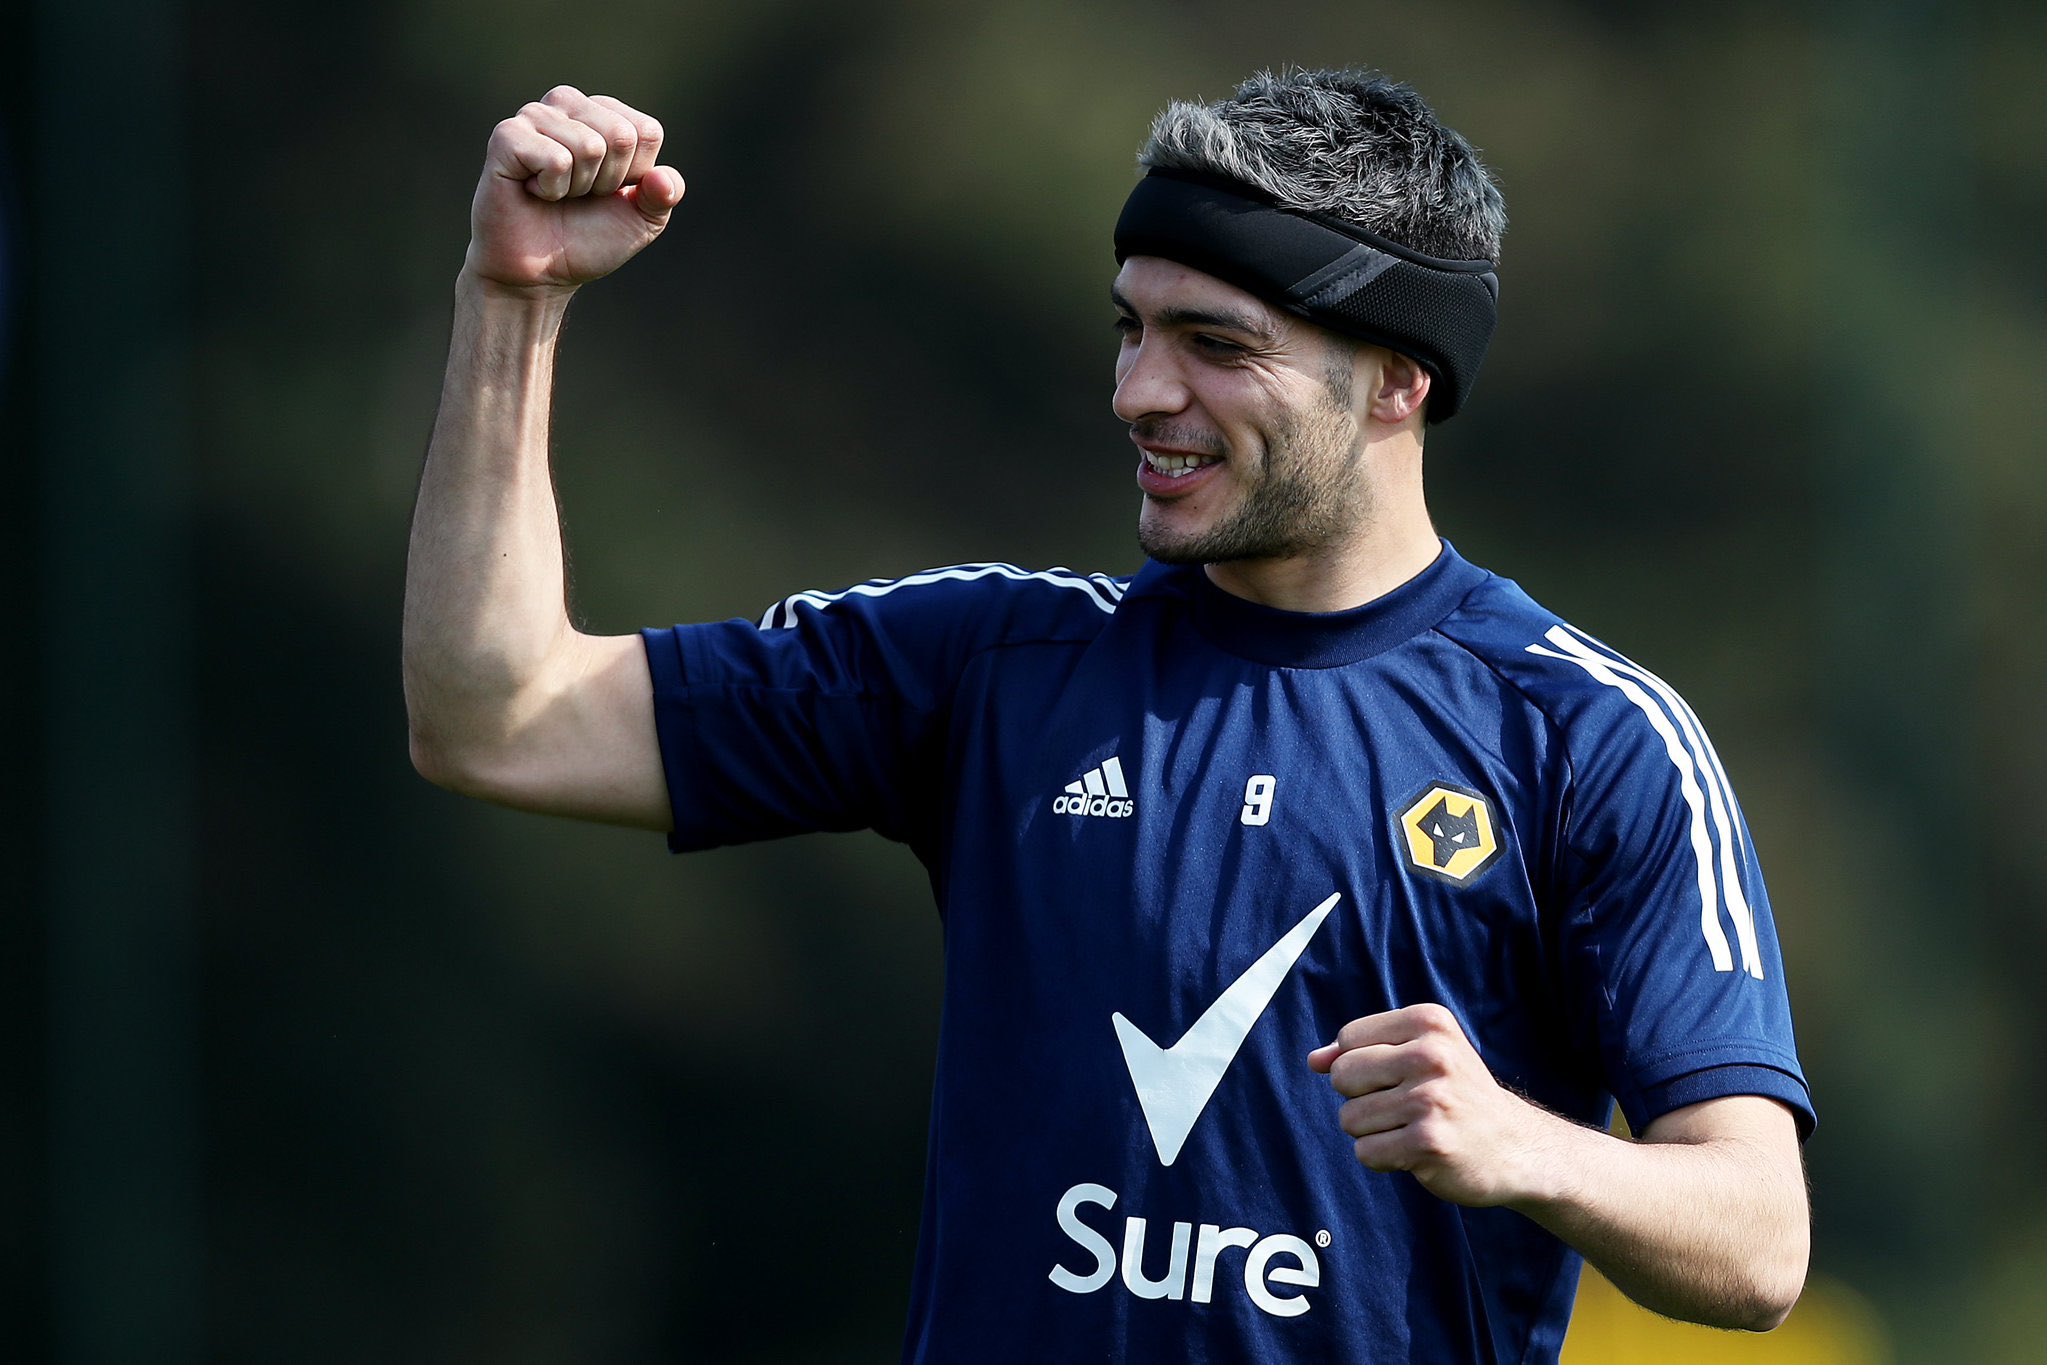 Hope and expect Raul Jimenez will be able to play in Wolves’s 2021/22 season, admits Matt Perry